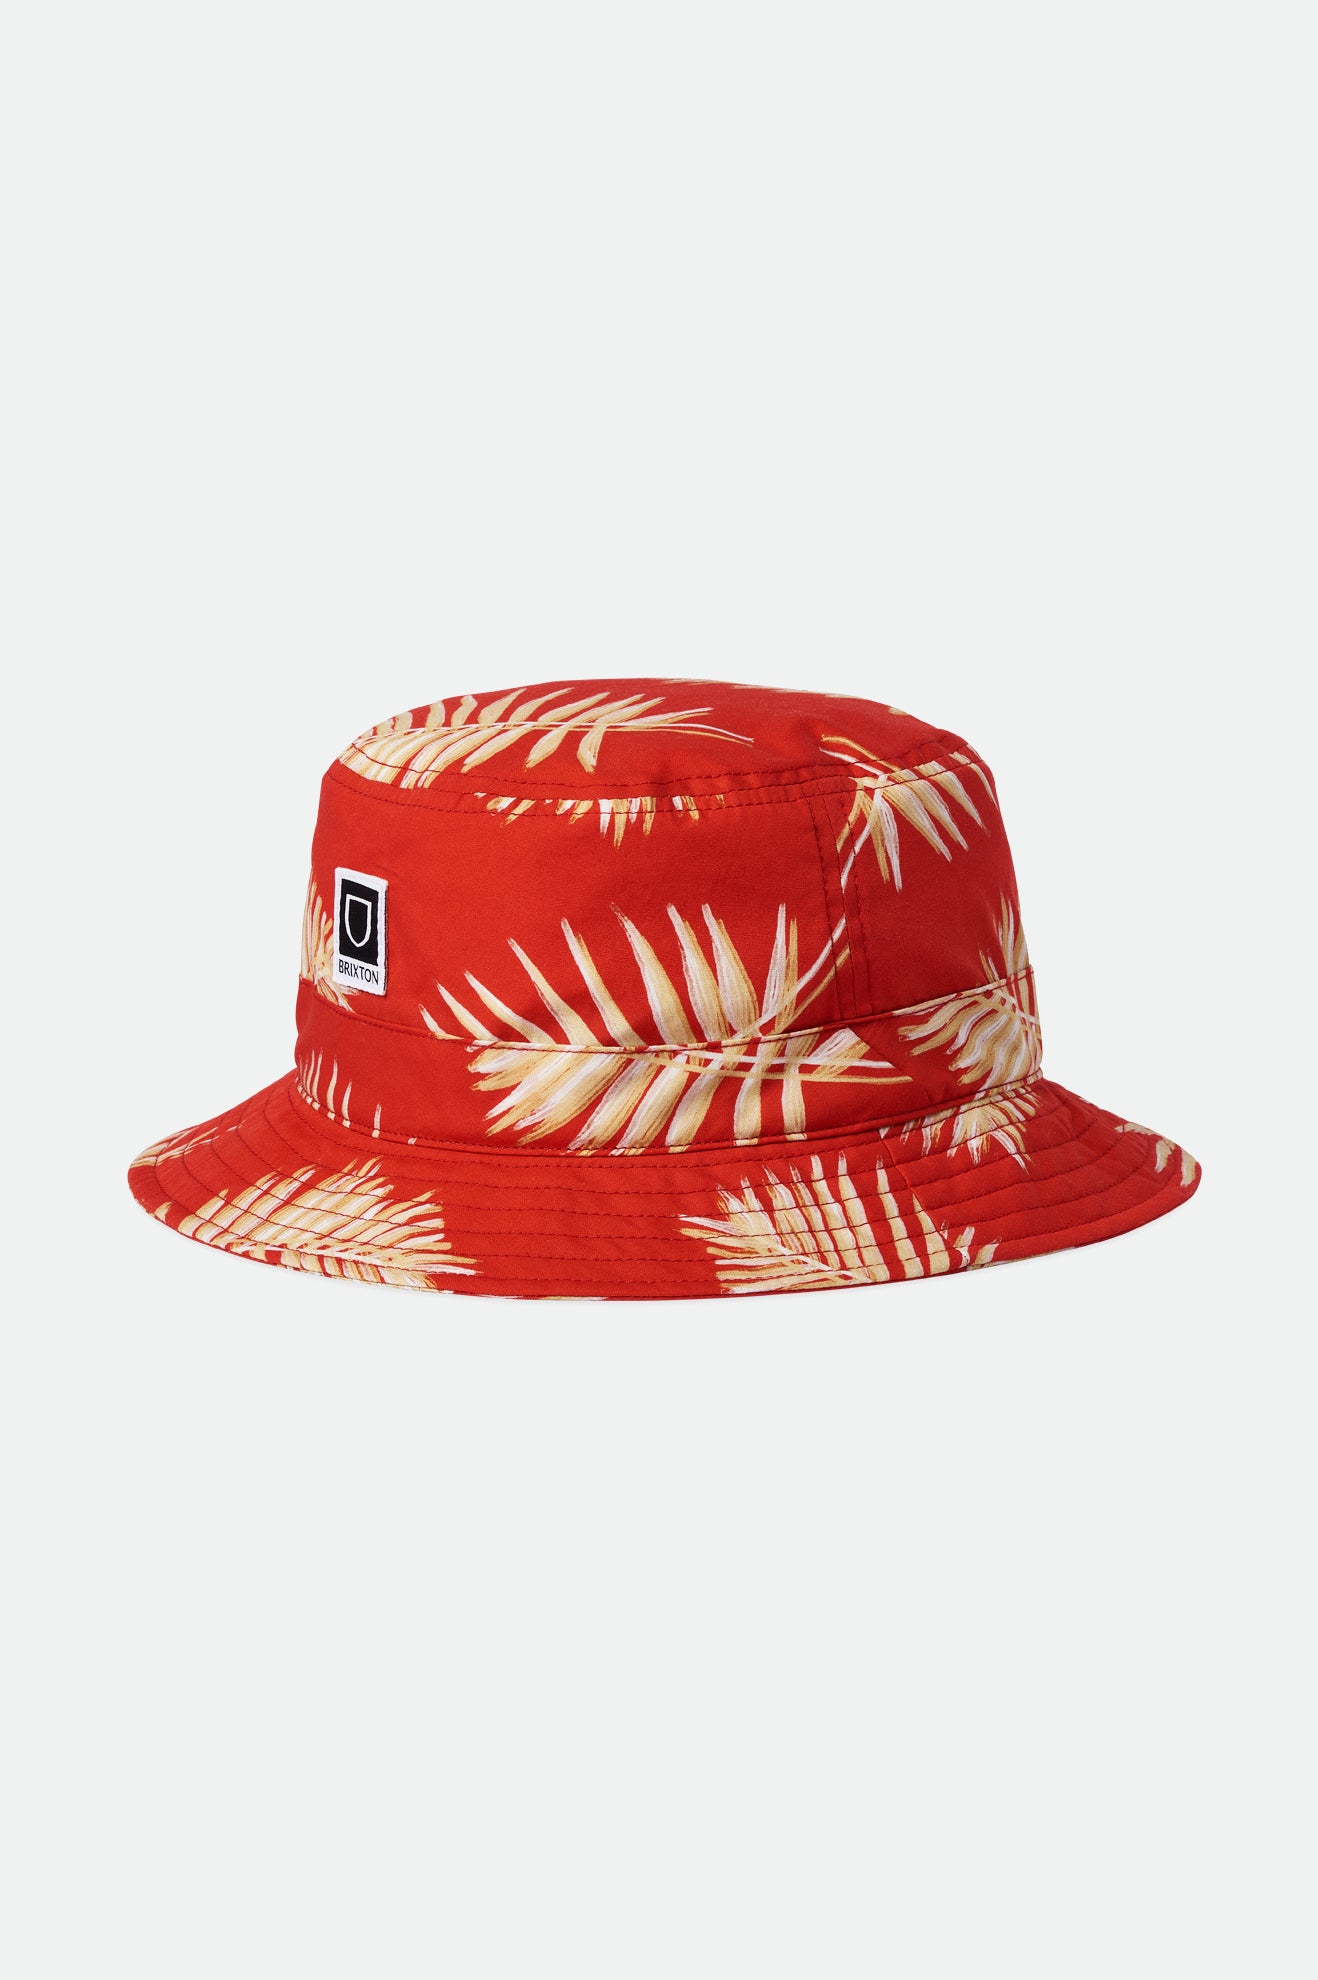 BRIXTON - BETA PACKABLE BUCKET HAT - ALOHA RED - S/M